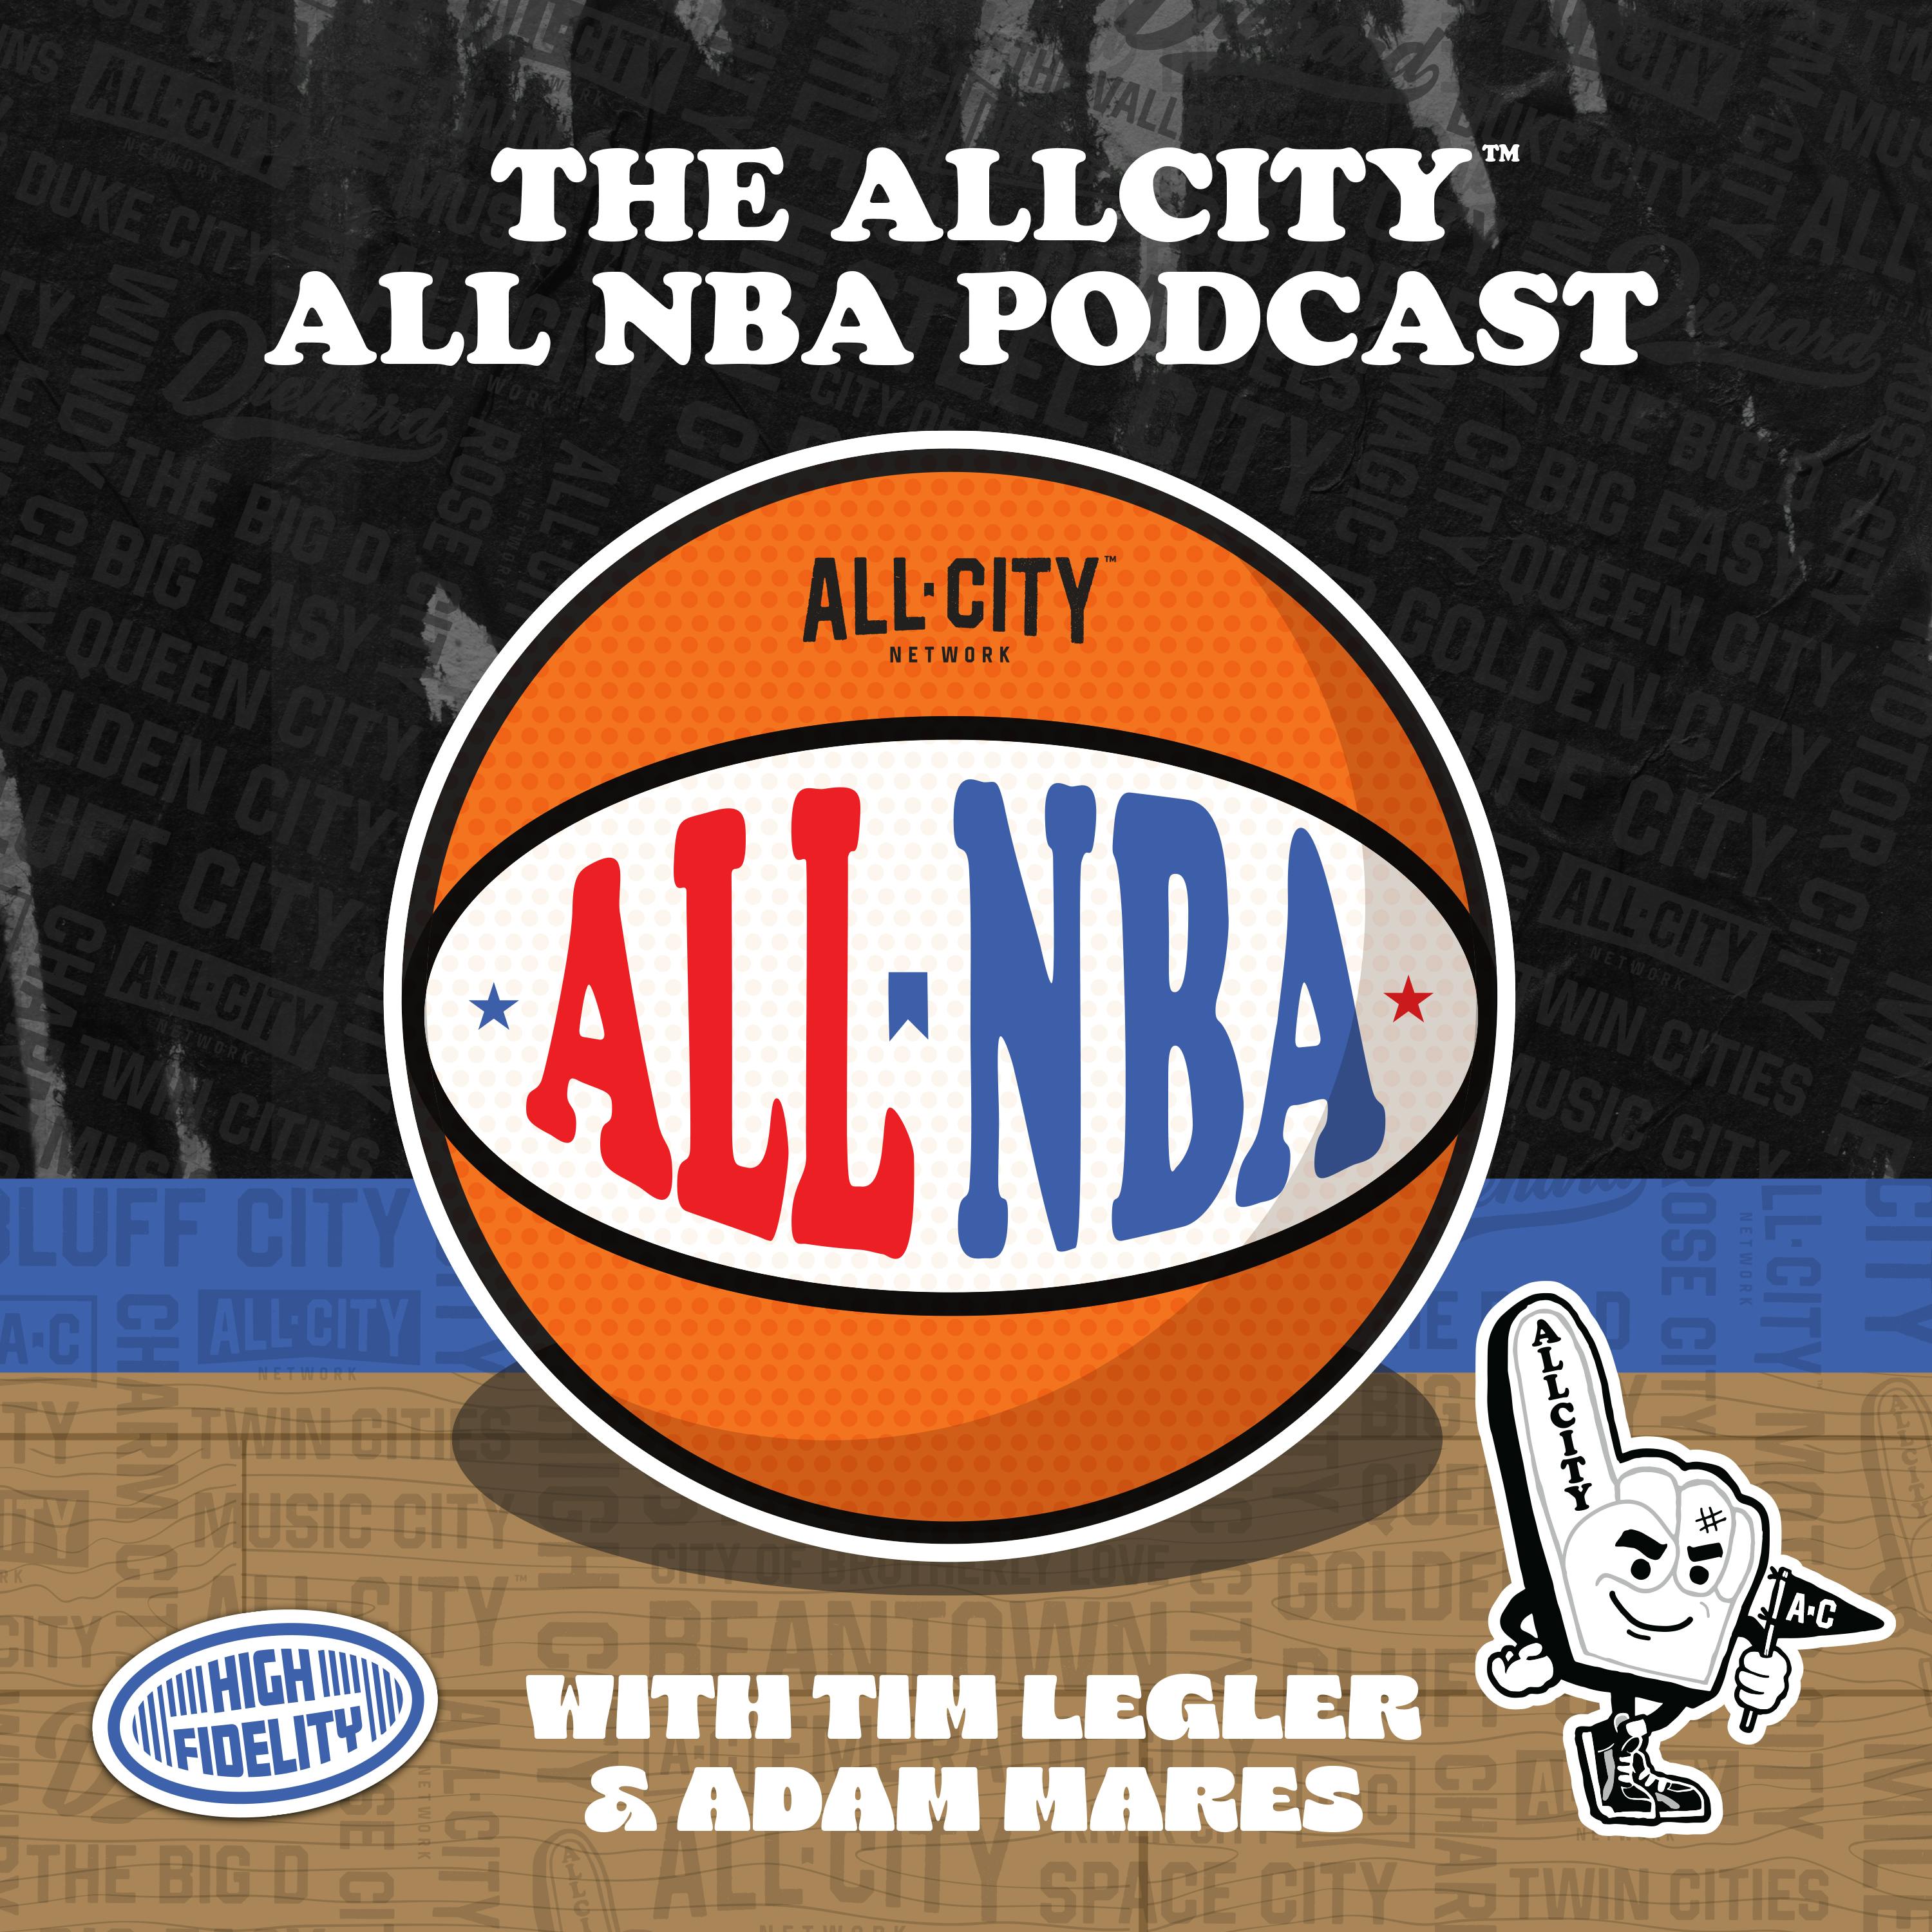 The ALL NBA Podcast: How Doncic and the Dallas Mavericks evened the series with the Clippers